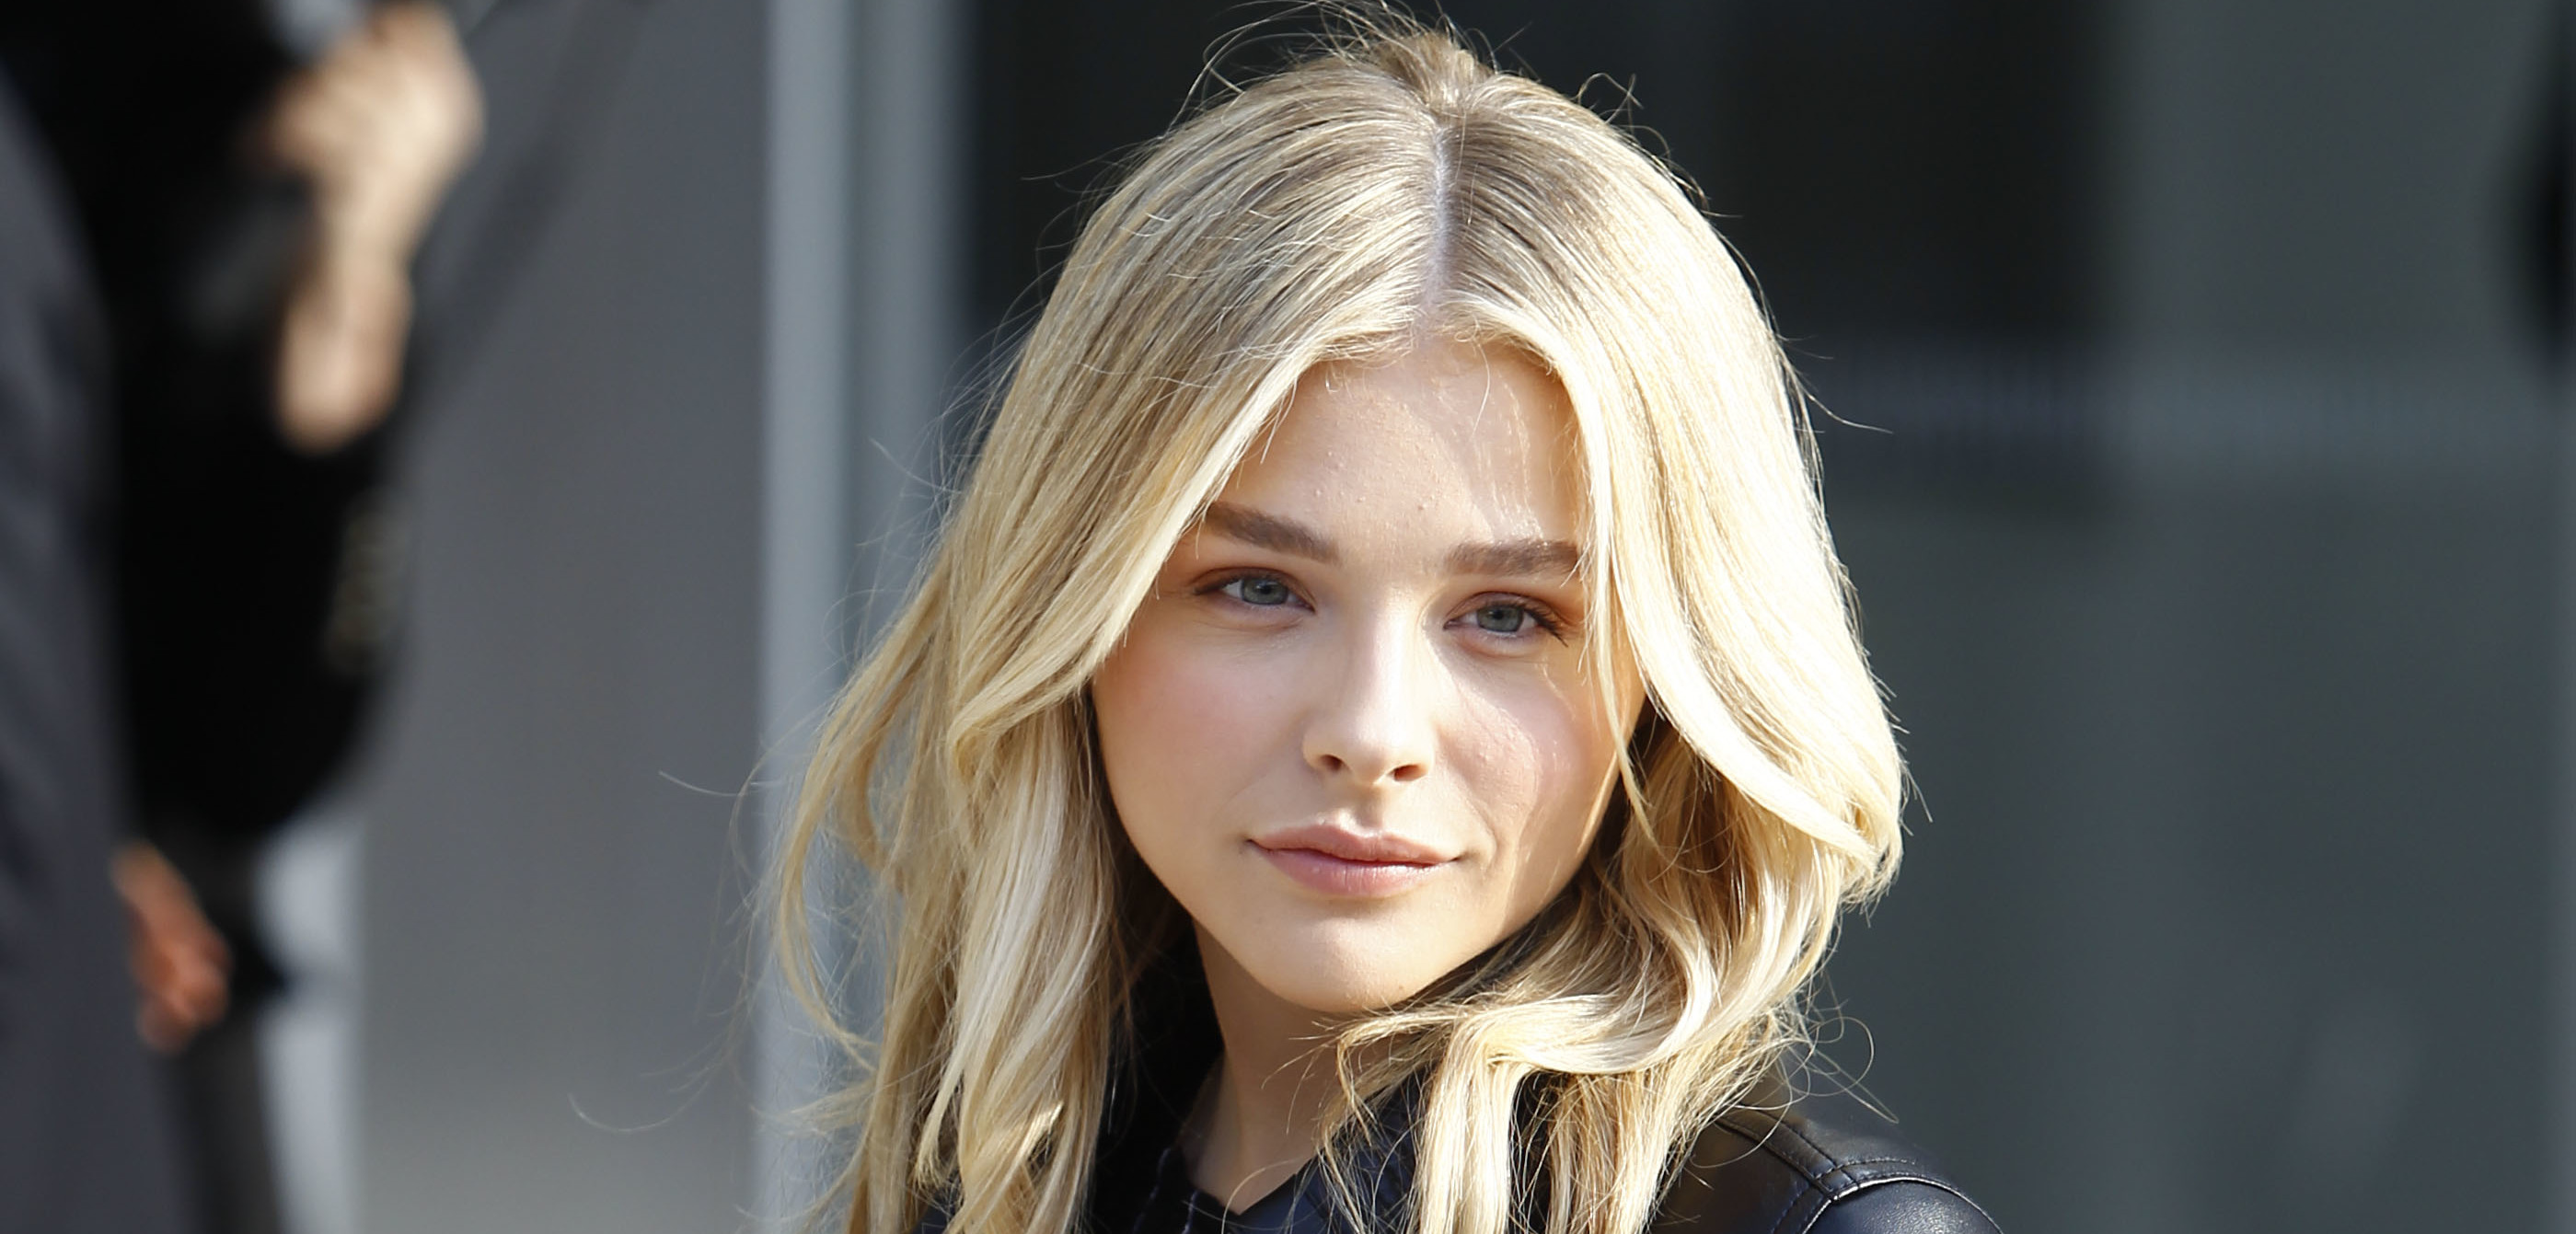 trendy download chloe grace moretz beautiful picture for mobile